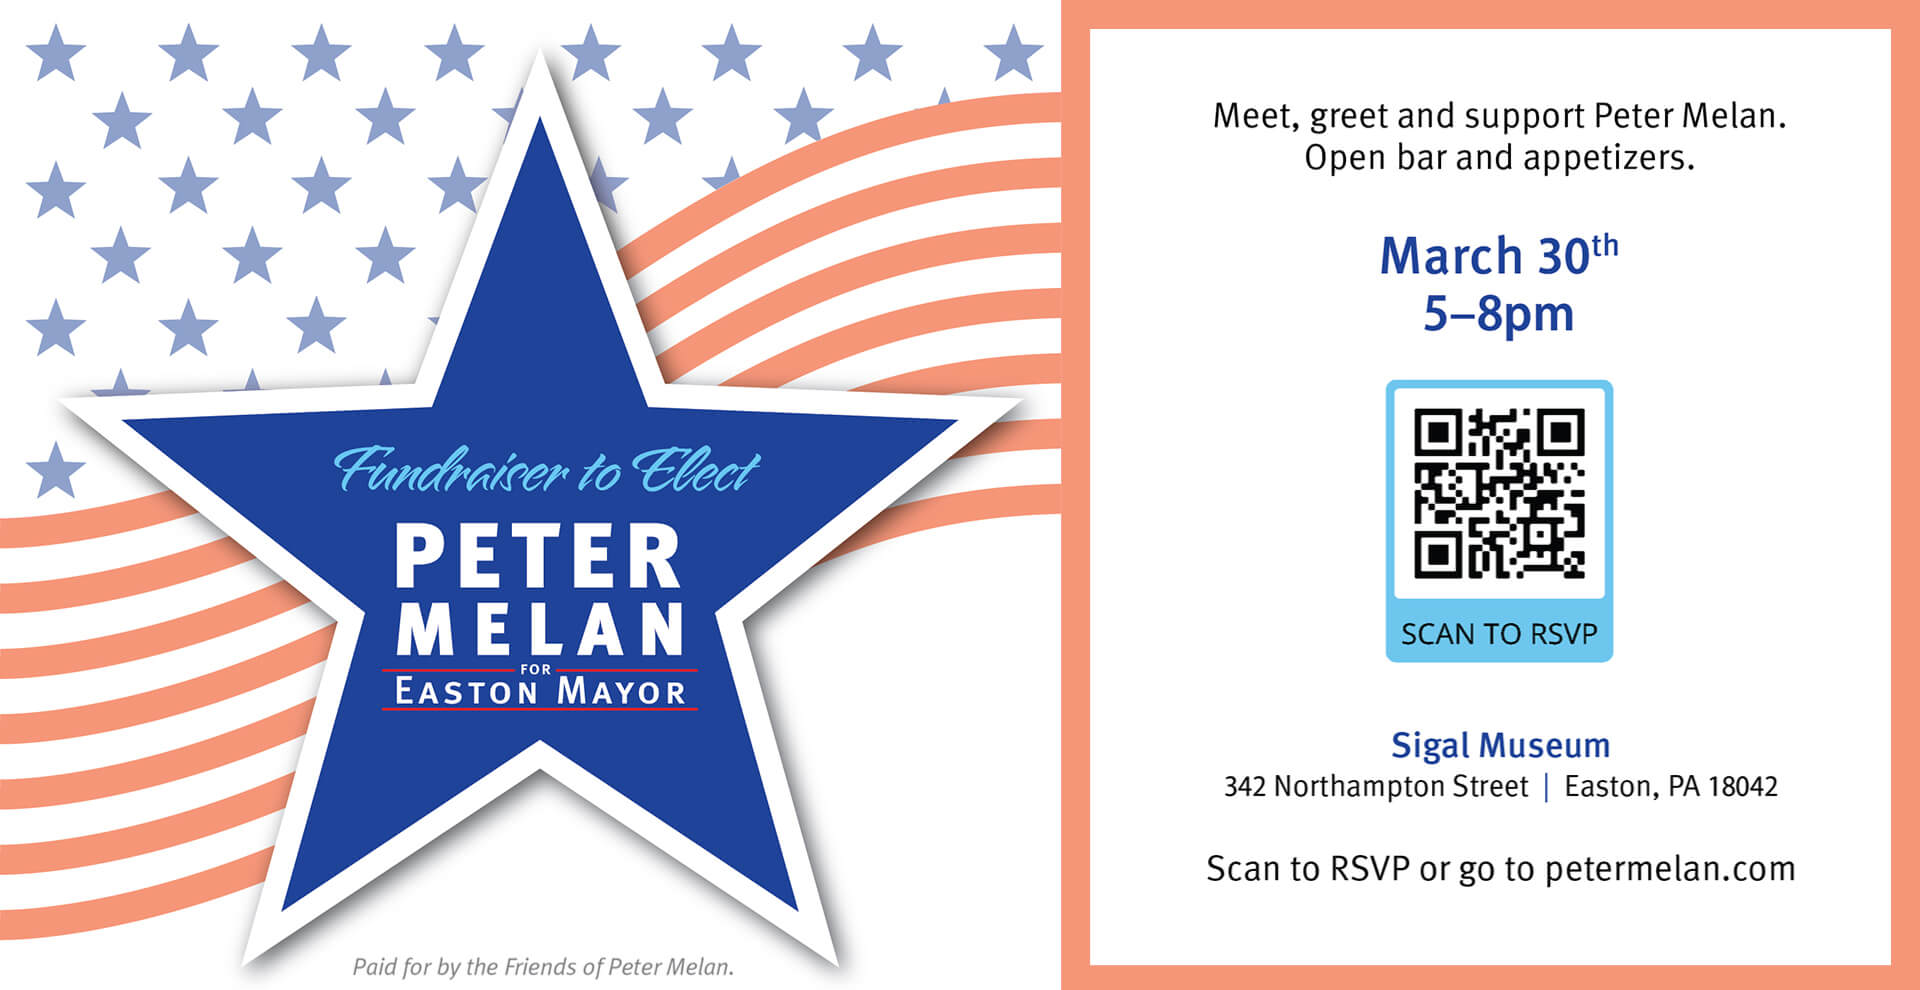 March 30, 2023 Meet and Greet Fundraiser Event